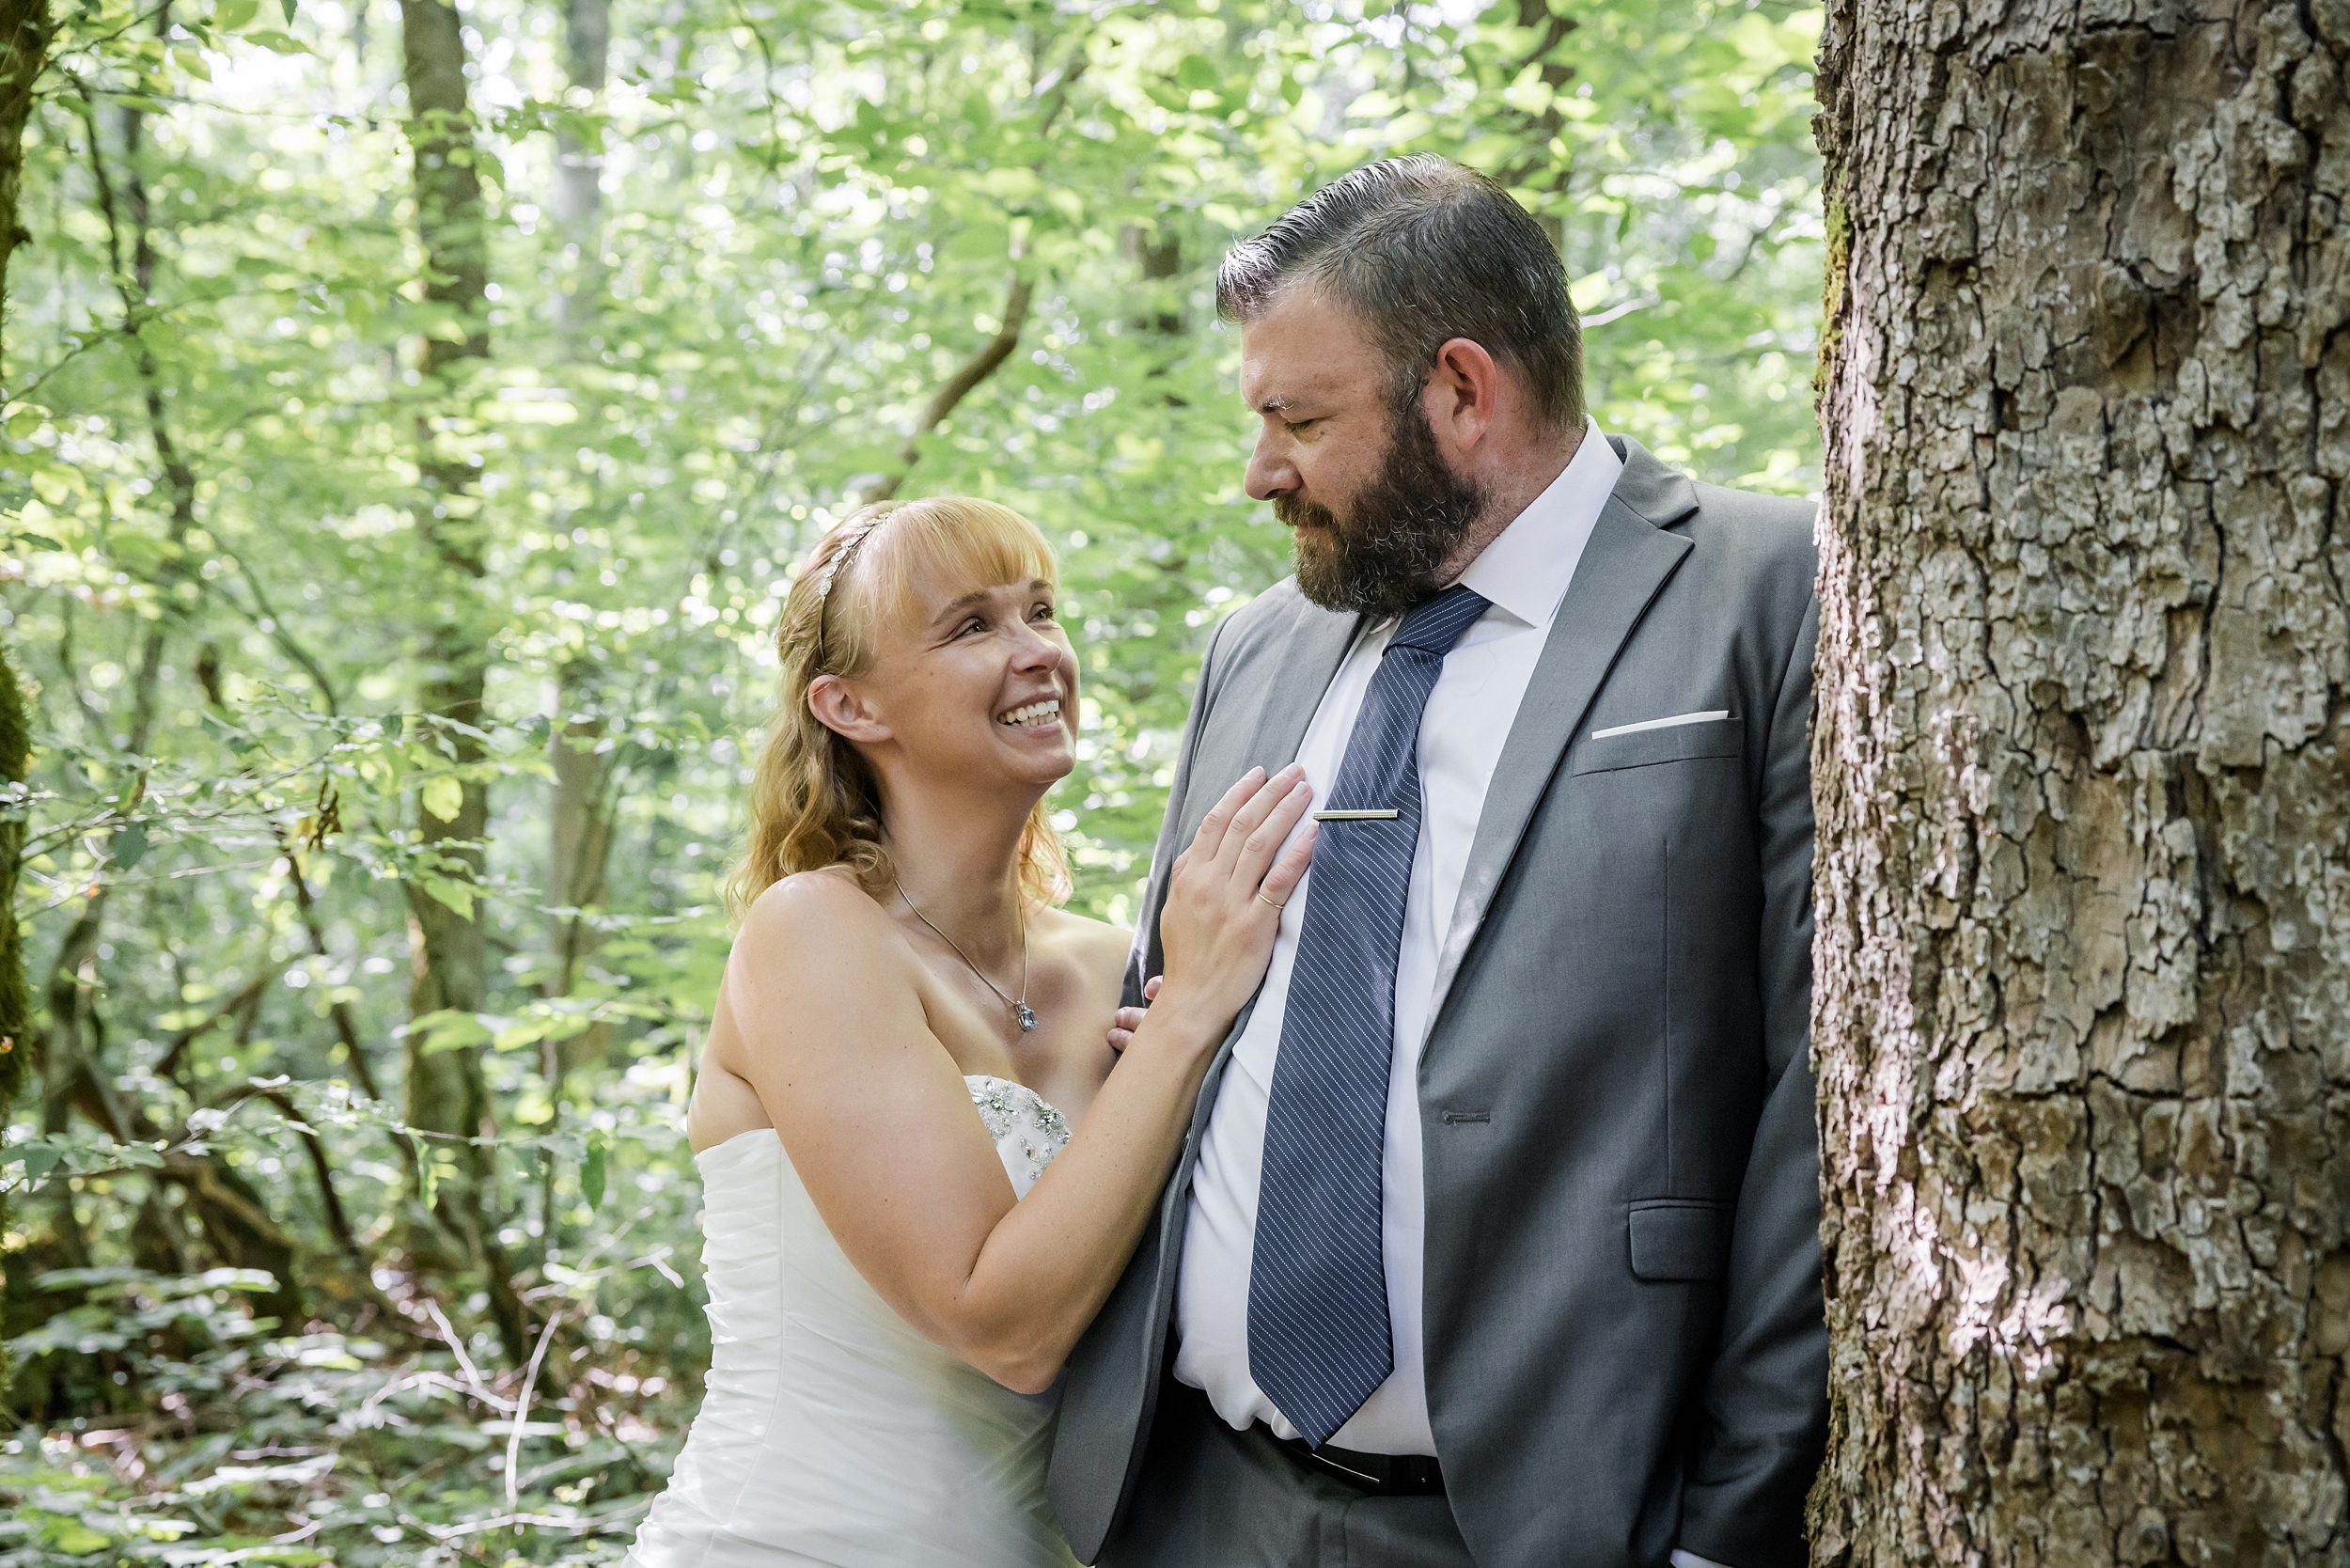 10 Year Vow Renewal in the Smokies